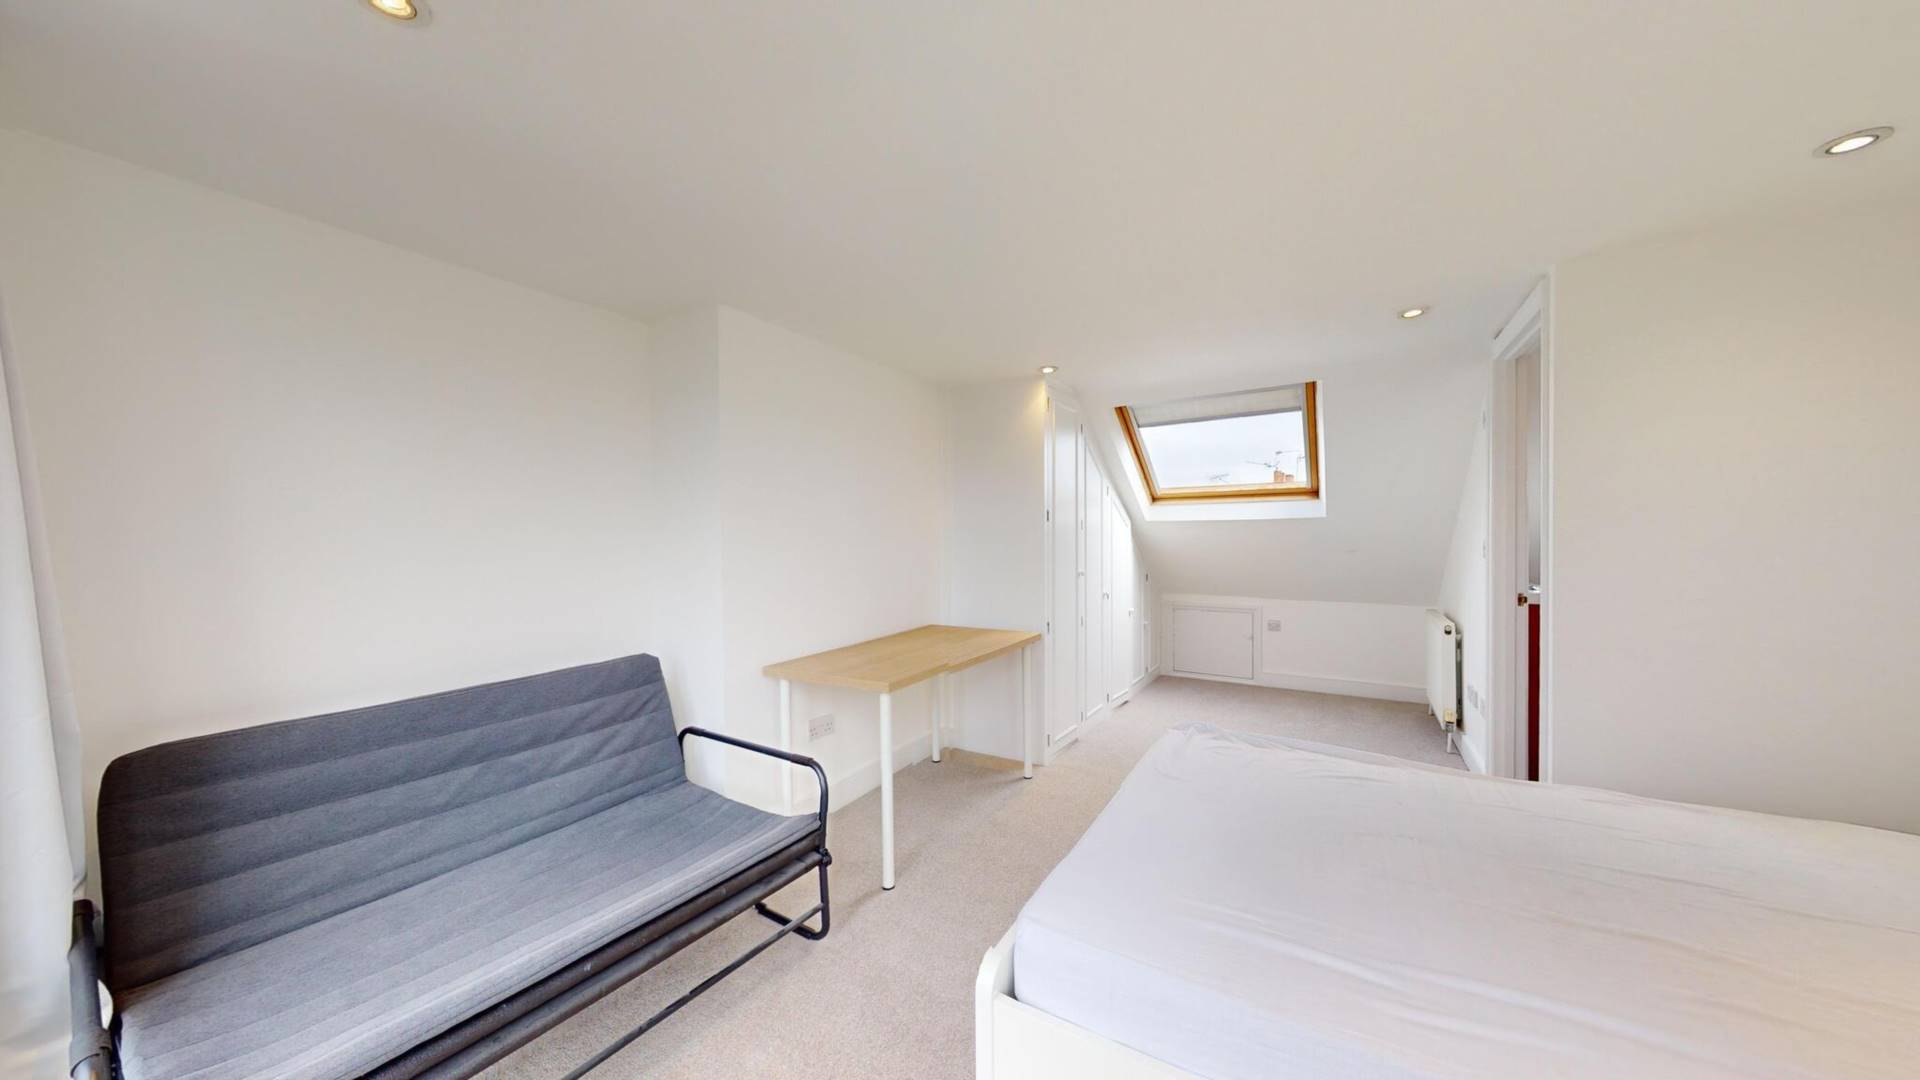 4 bed house, Fabian Road SW6, Image 14